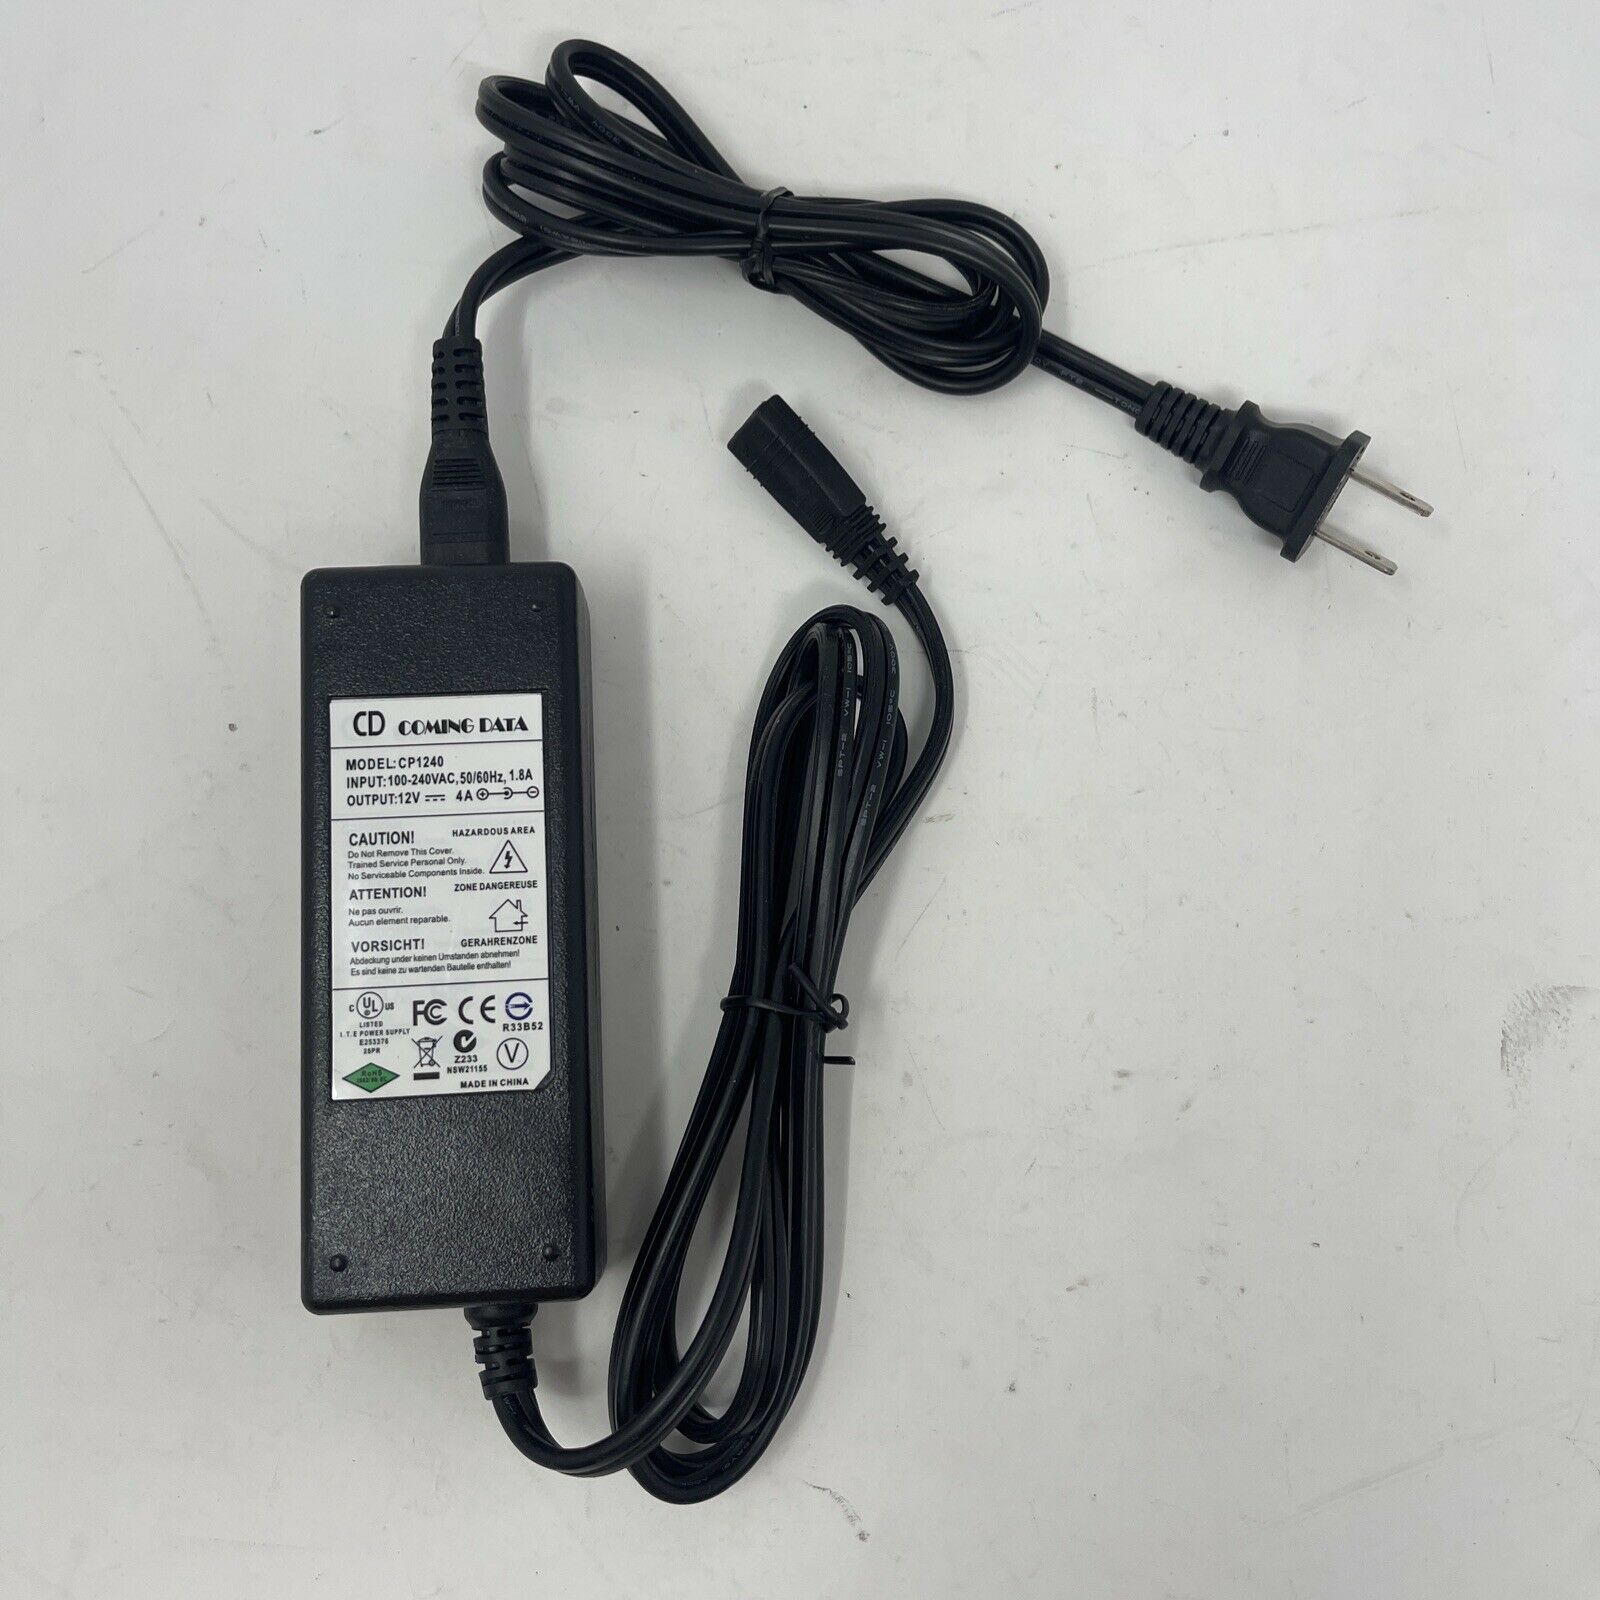 Genuine Coming Data CD CP1240 12V 4A Power Supply AC Adapter Brand: Coming Data Type: AC/DC Adapter Connection Split